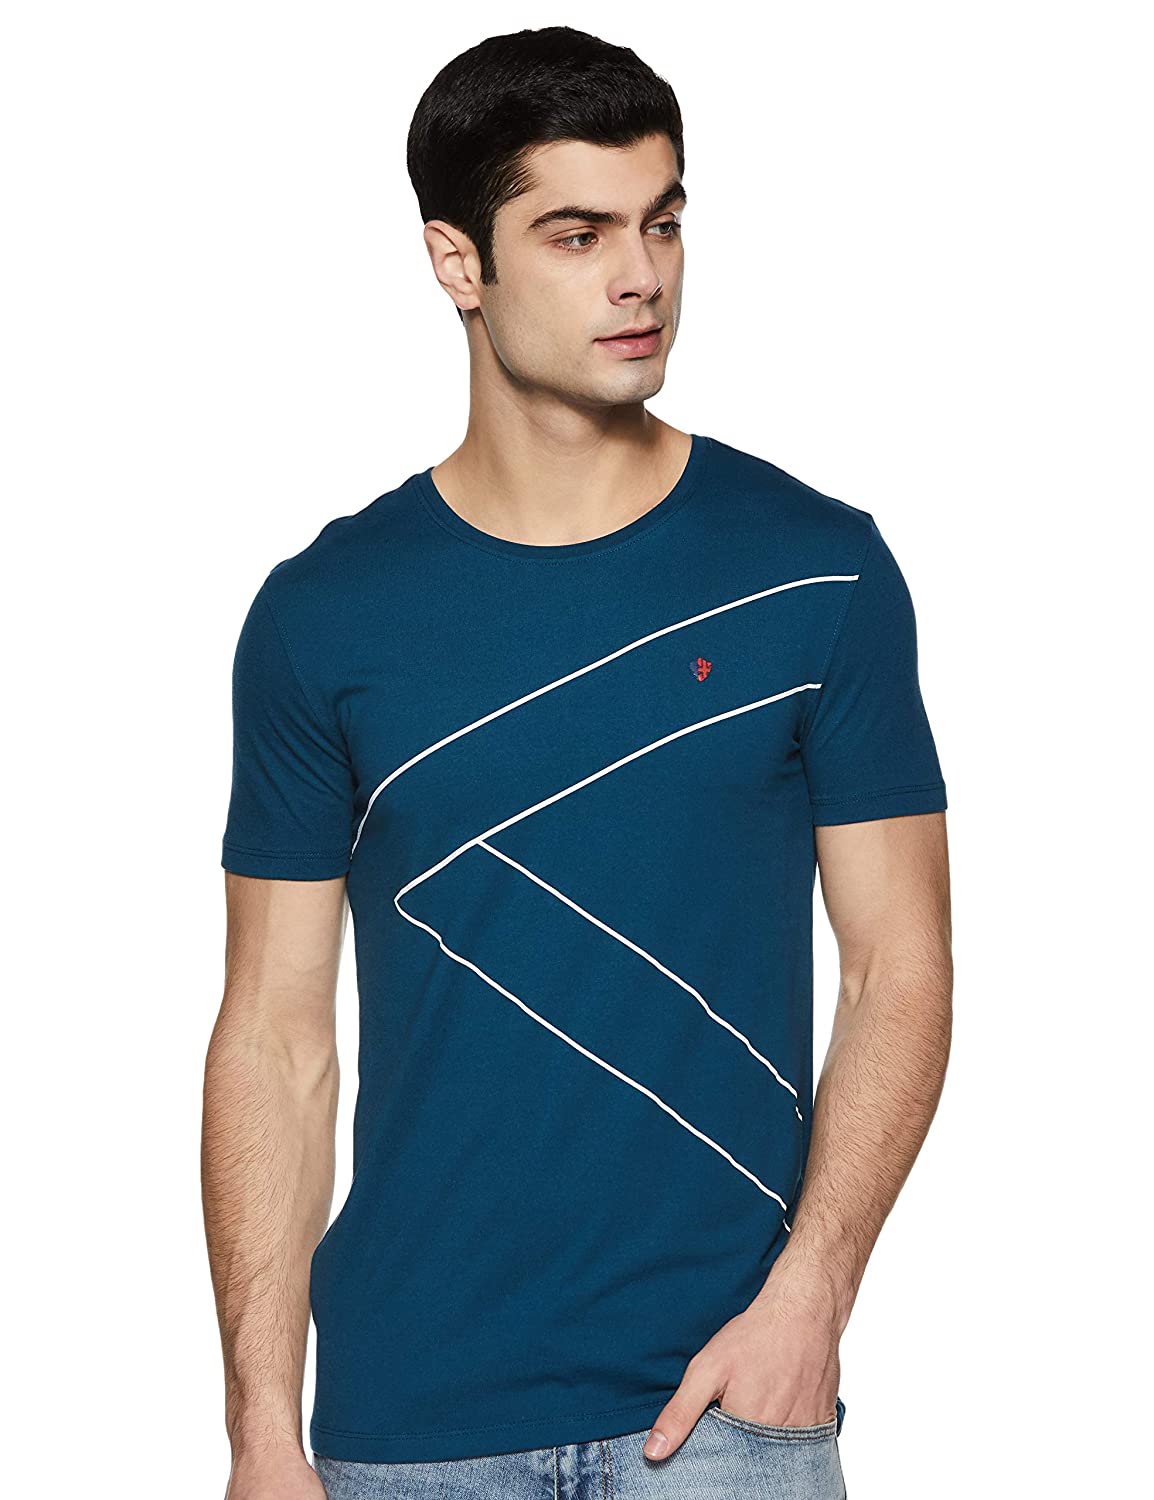 Elements by Peter England Men's T-Shirt